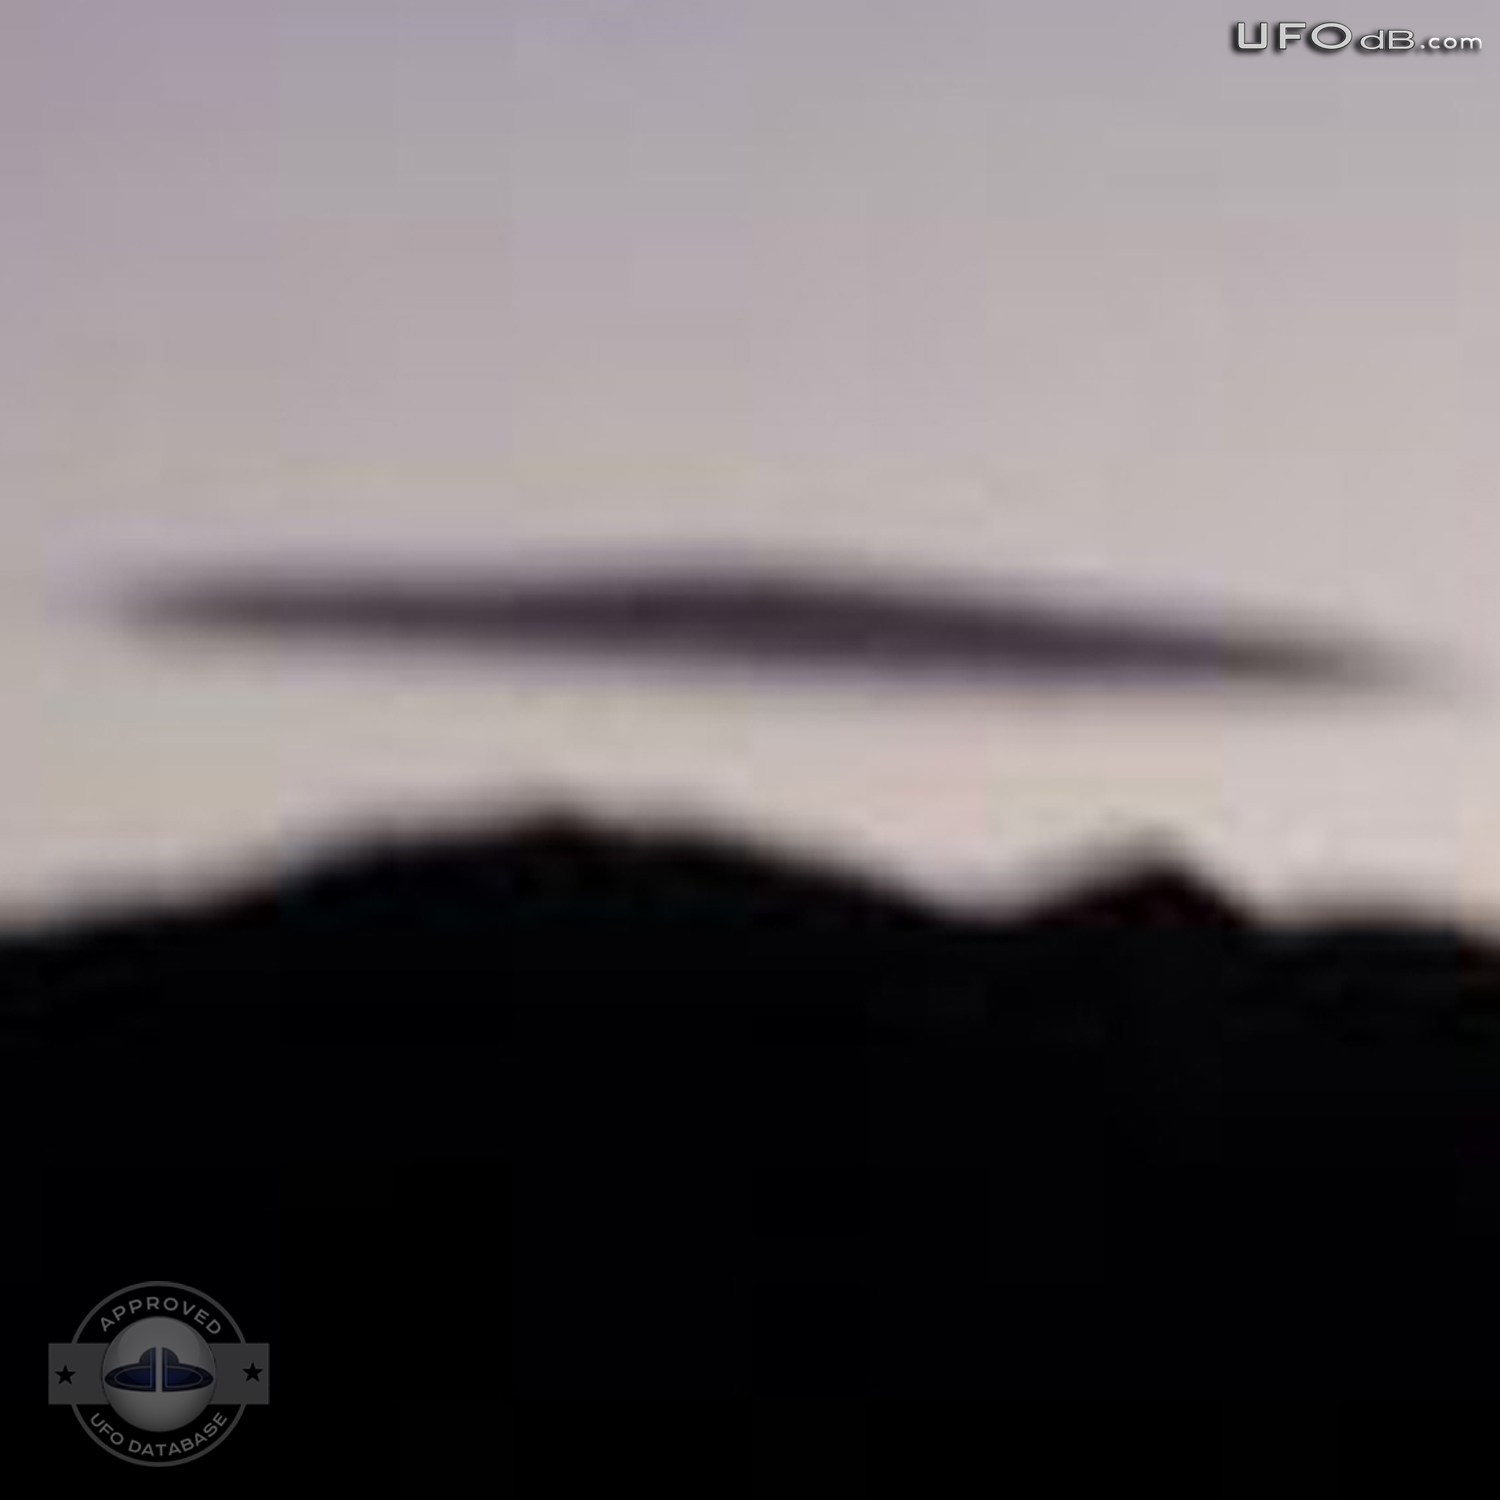 Renowned Aviator shoot a UFO picture in Cachi, Argentina | April 2011 UFO Picture #283-3